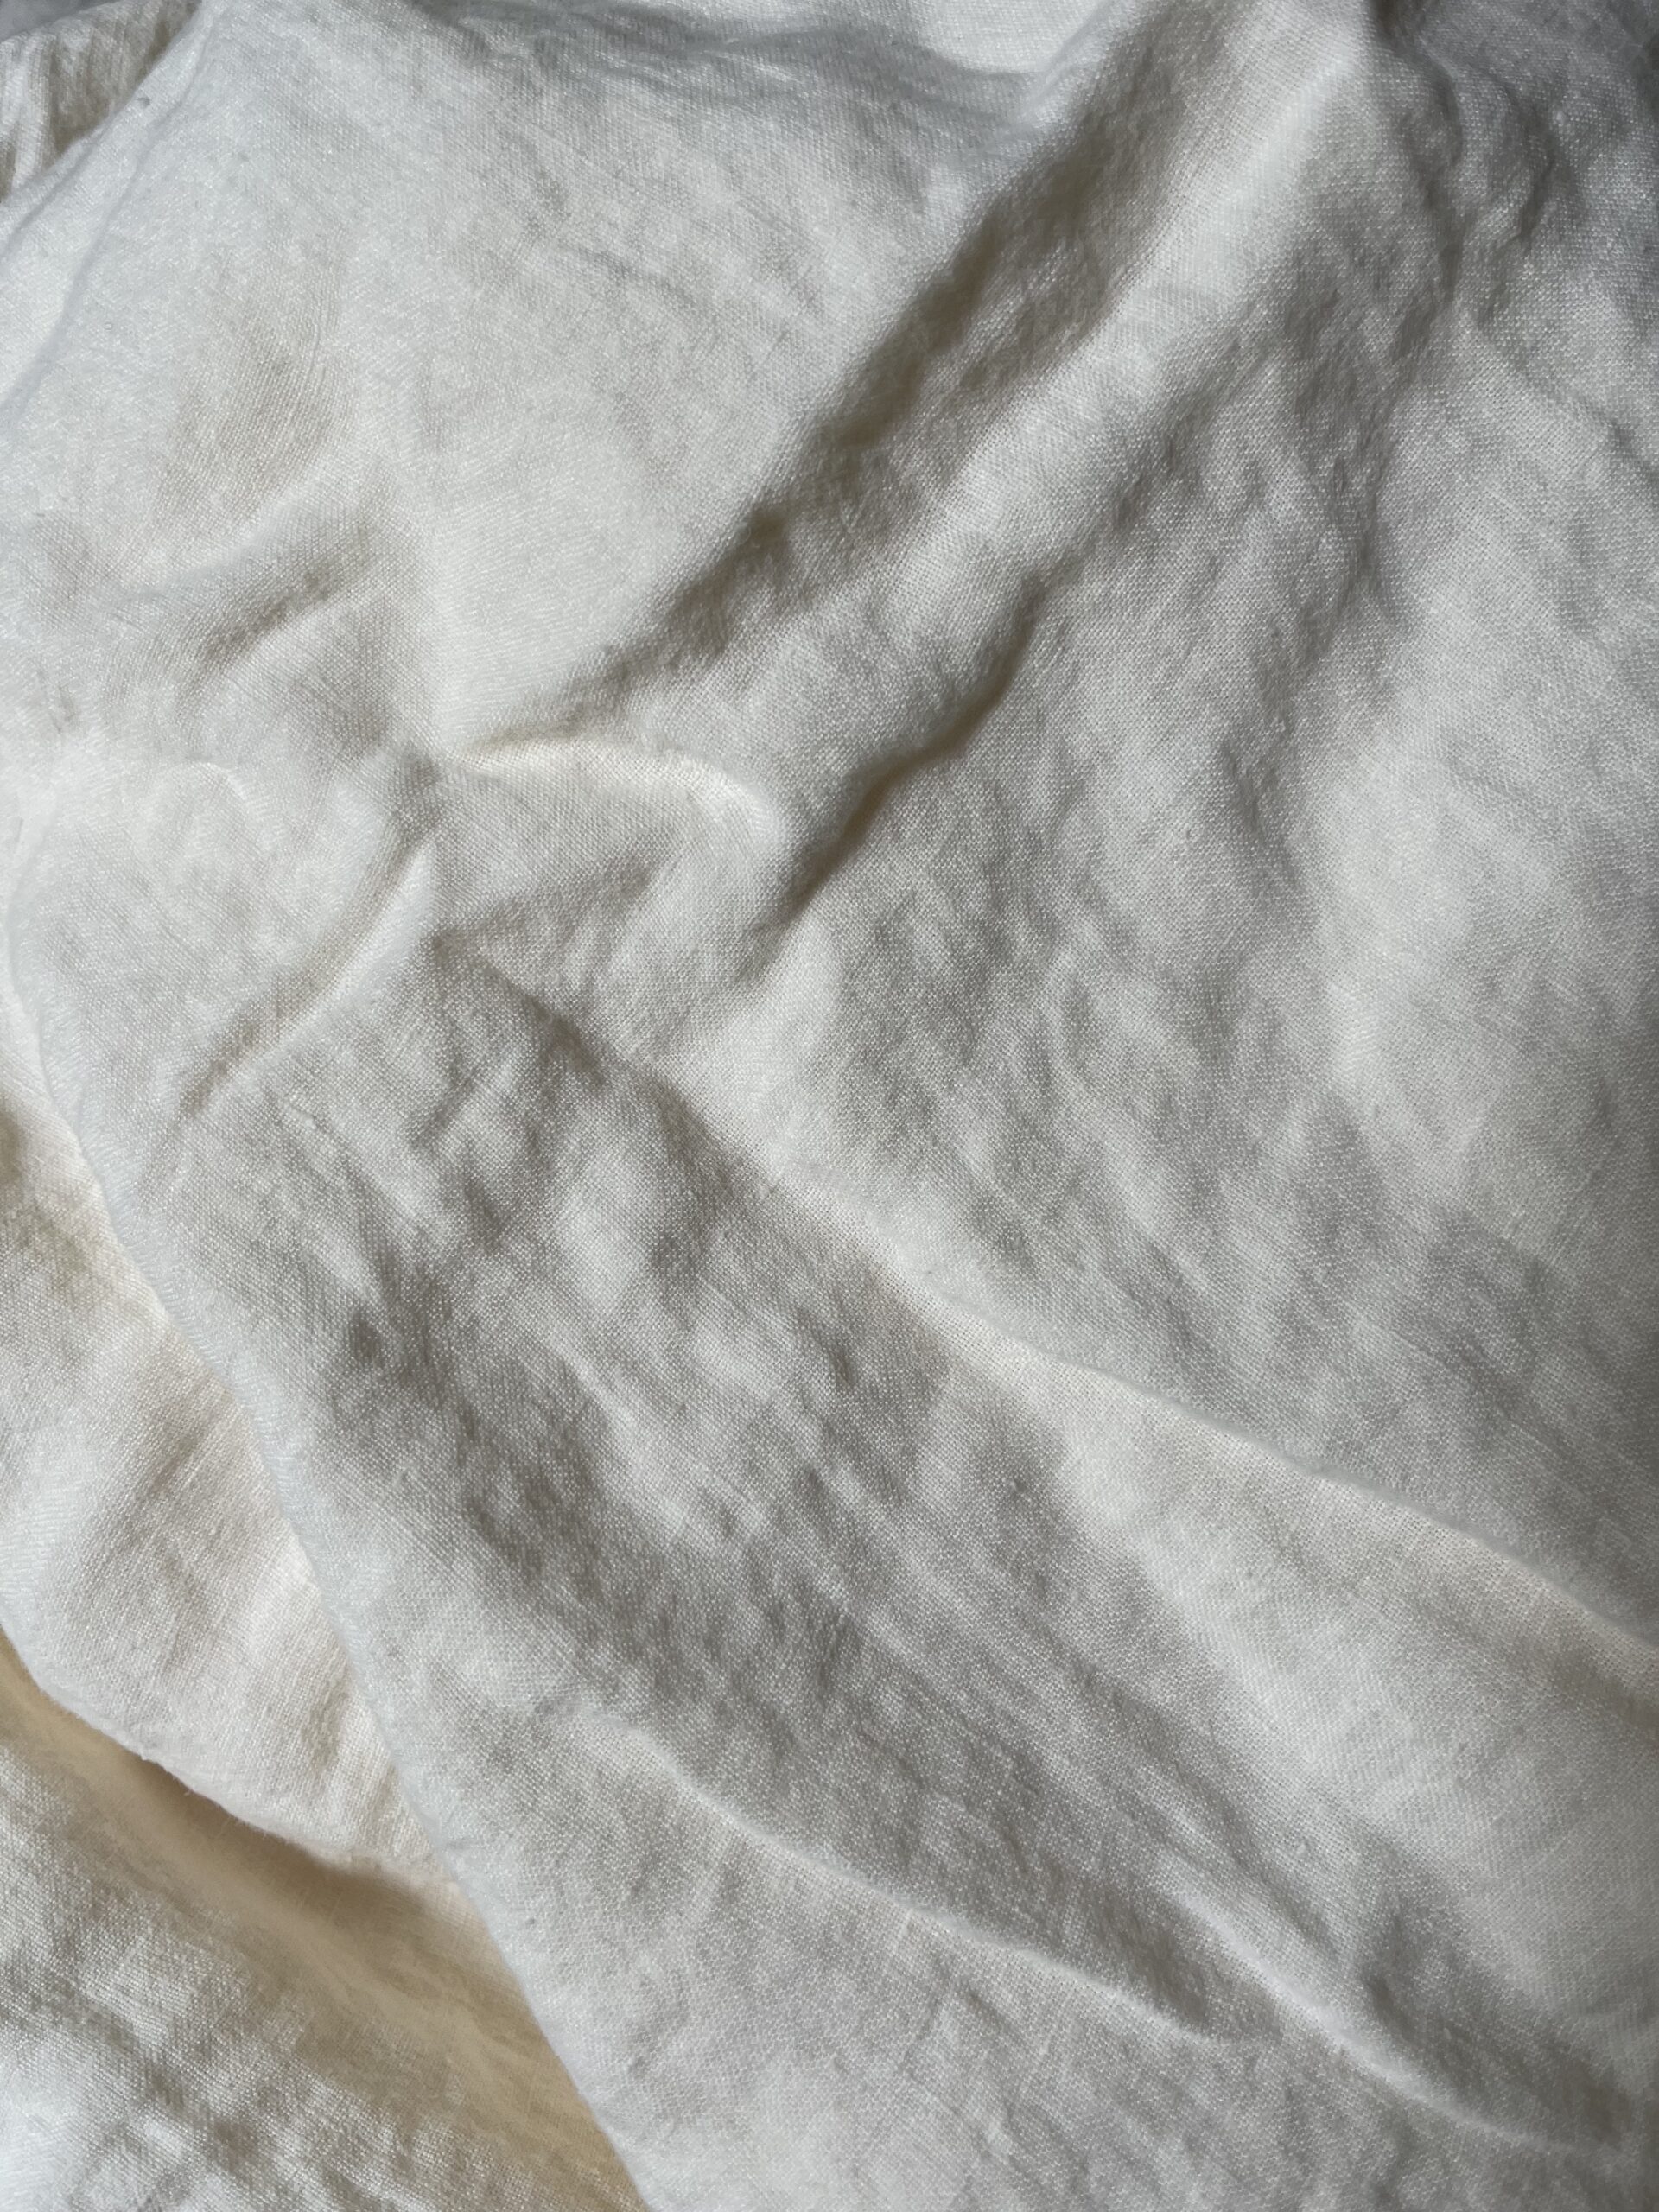 Close-up view of a crumpled, off-white fabric with a slightly textured surface.